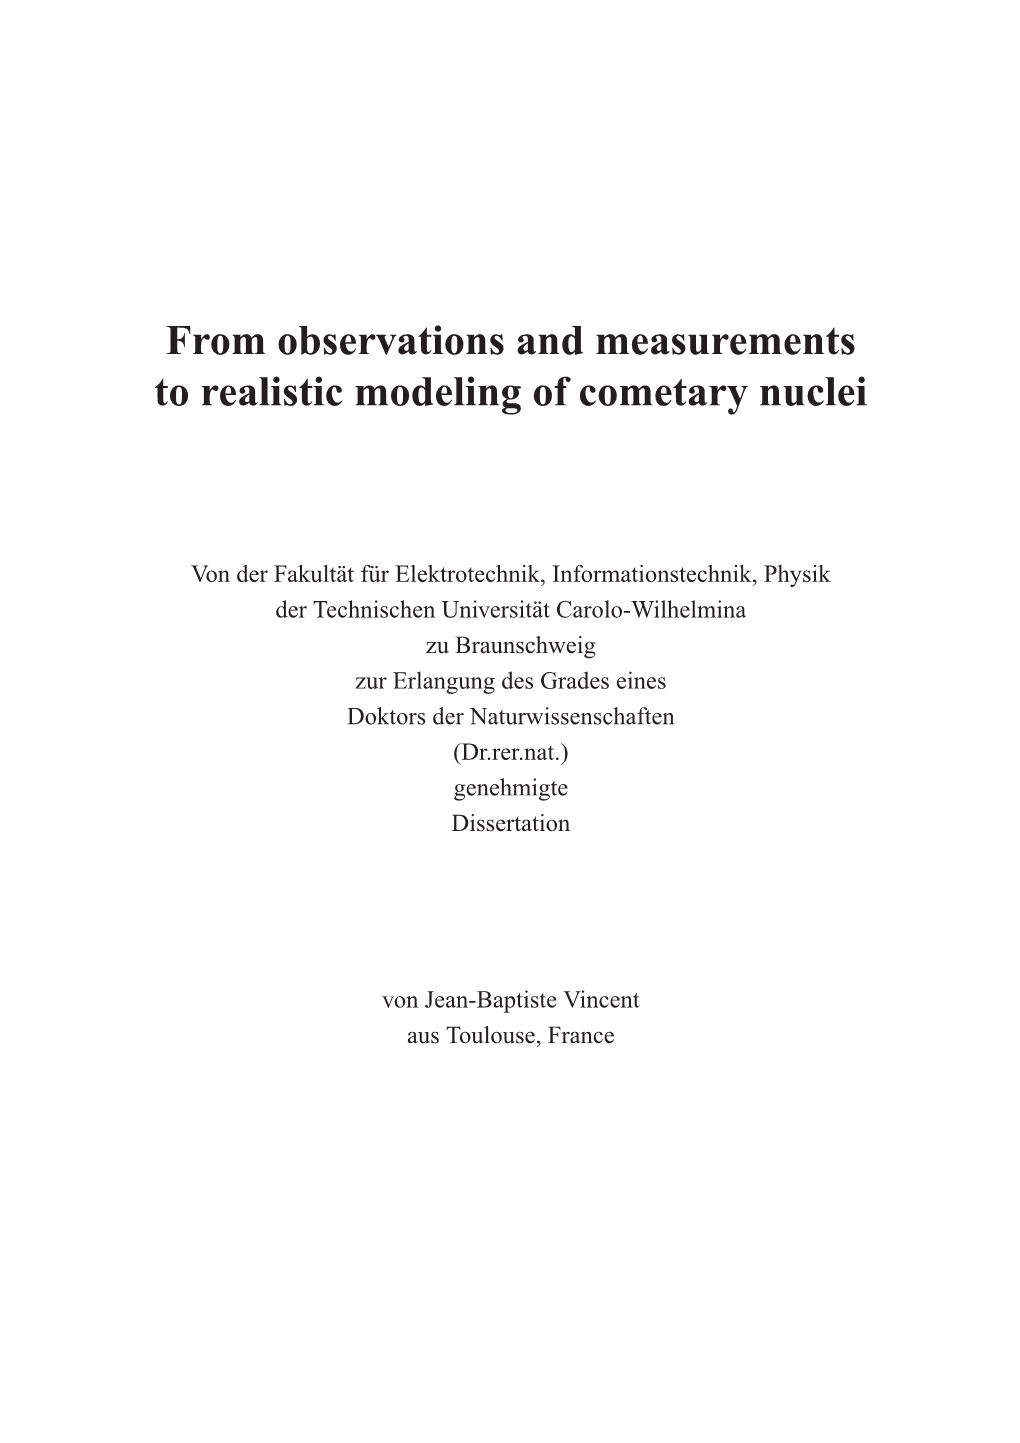 From Observations and Measurements to Realistic Modeling of Cometary Nuclei